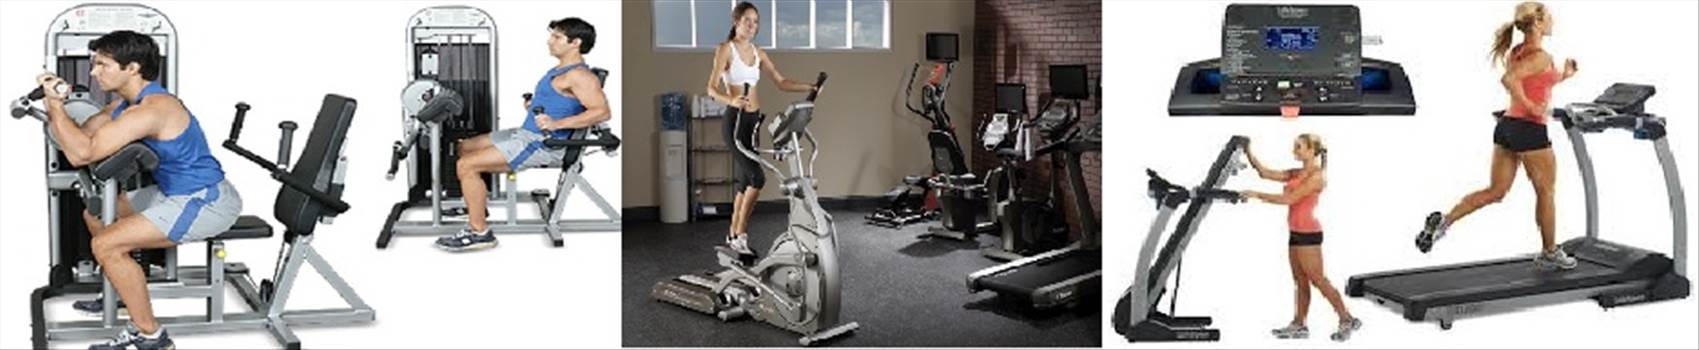 Northern California's Premier exercise equipment service provider specializing in commercial treadmills parts and repairs service in San Jose. For more information at http://www.gymdoc.com/treadmills